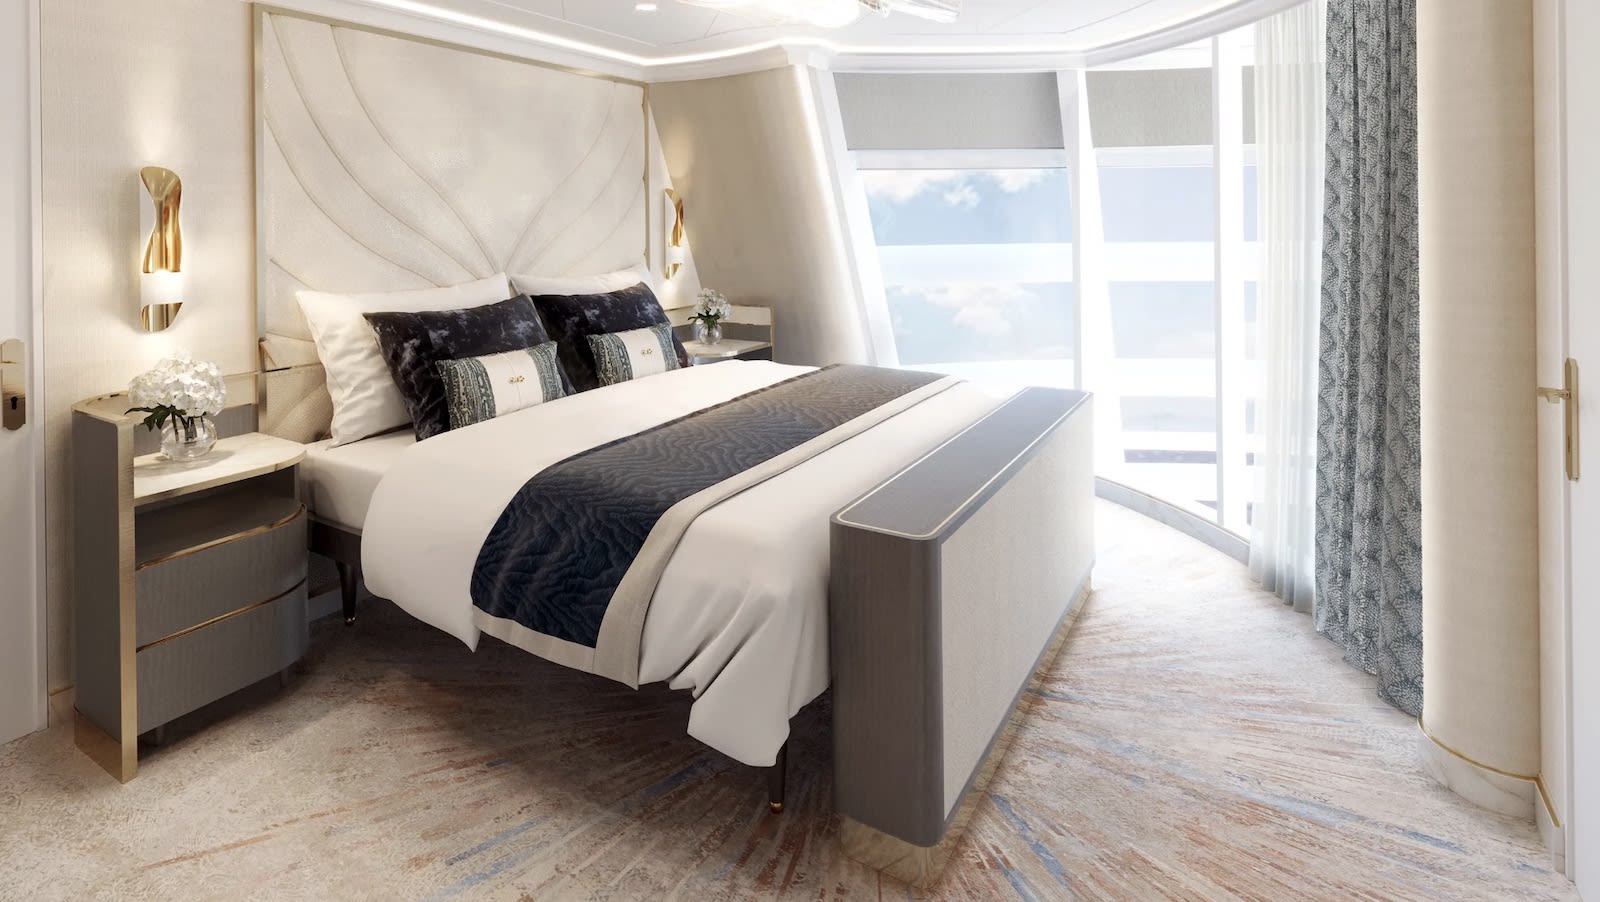 The most luxurious cruise ship suites in the world .. two-storey suites, personal servants and a slide